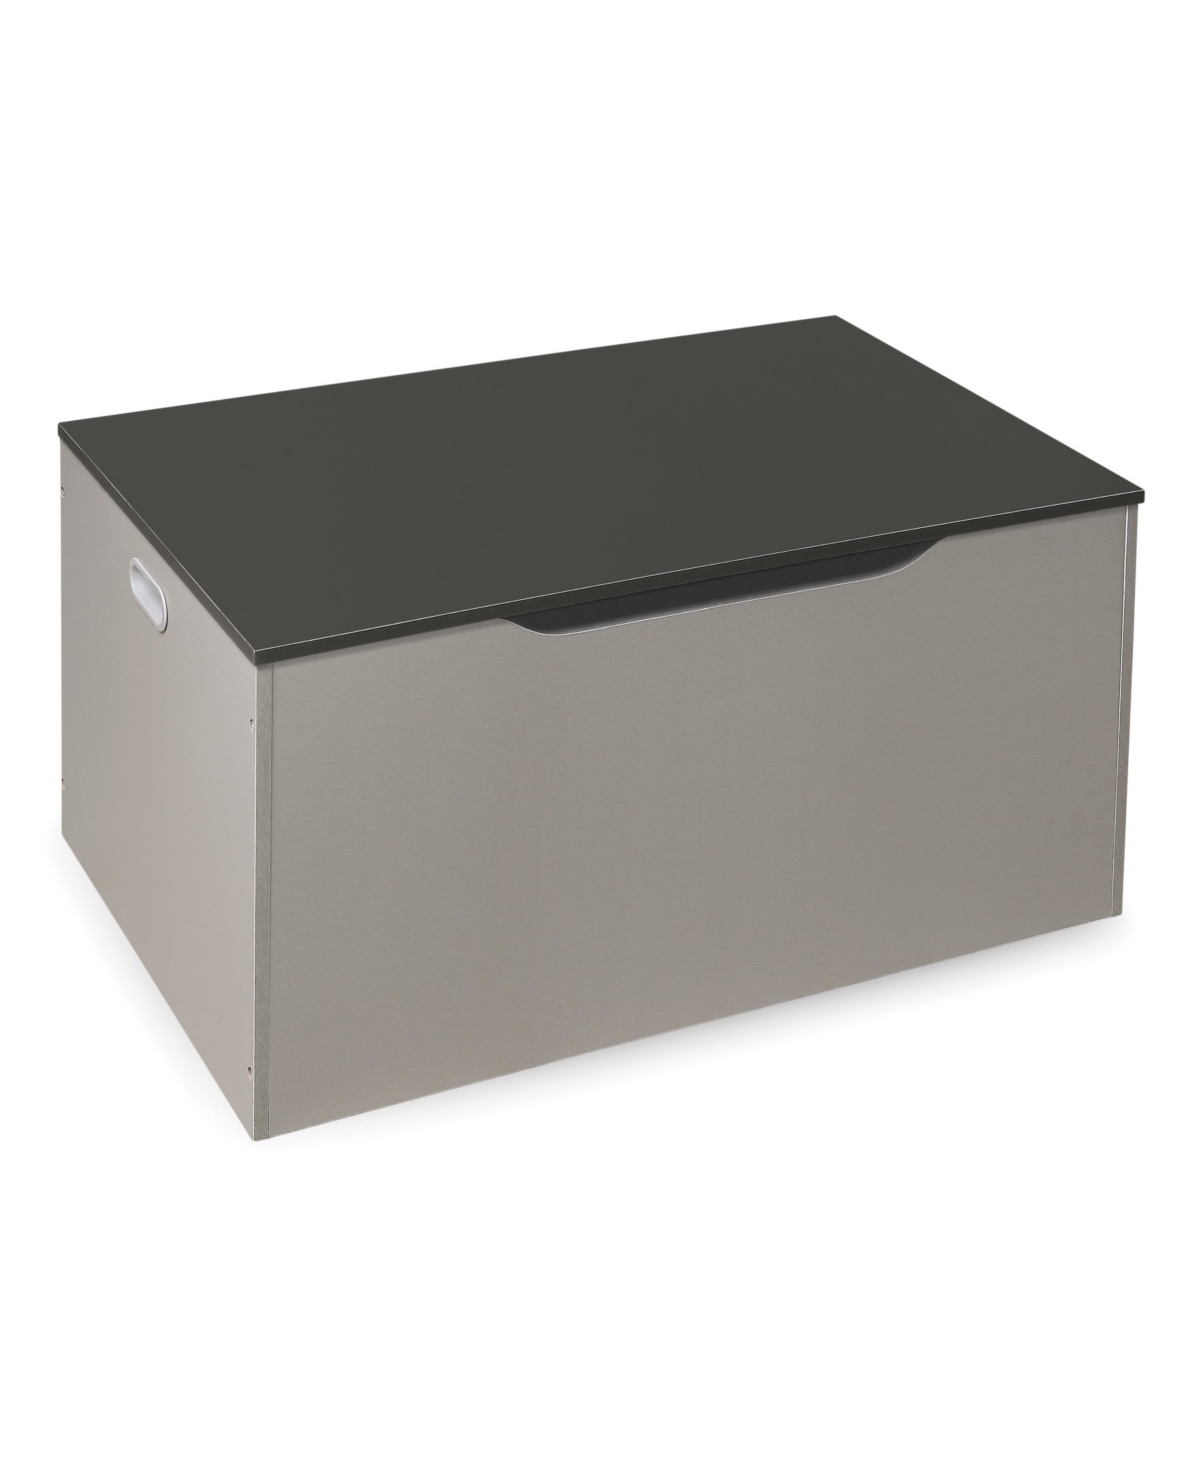 Flat Bench Top Toy And Storage Box - Gray